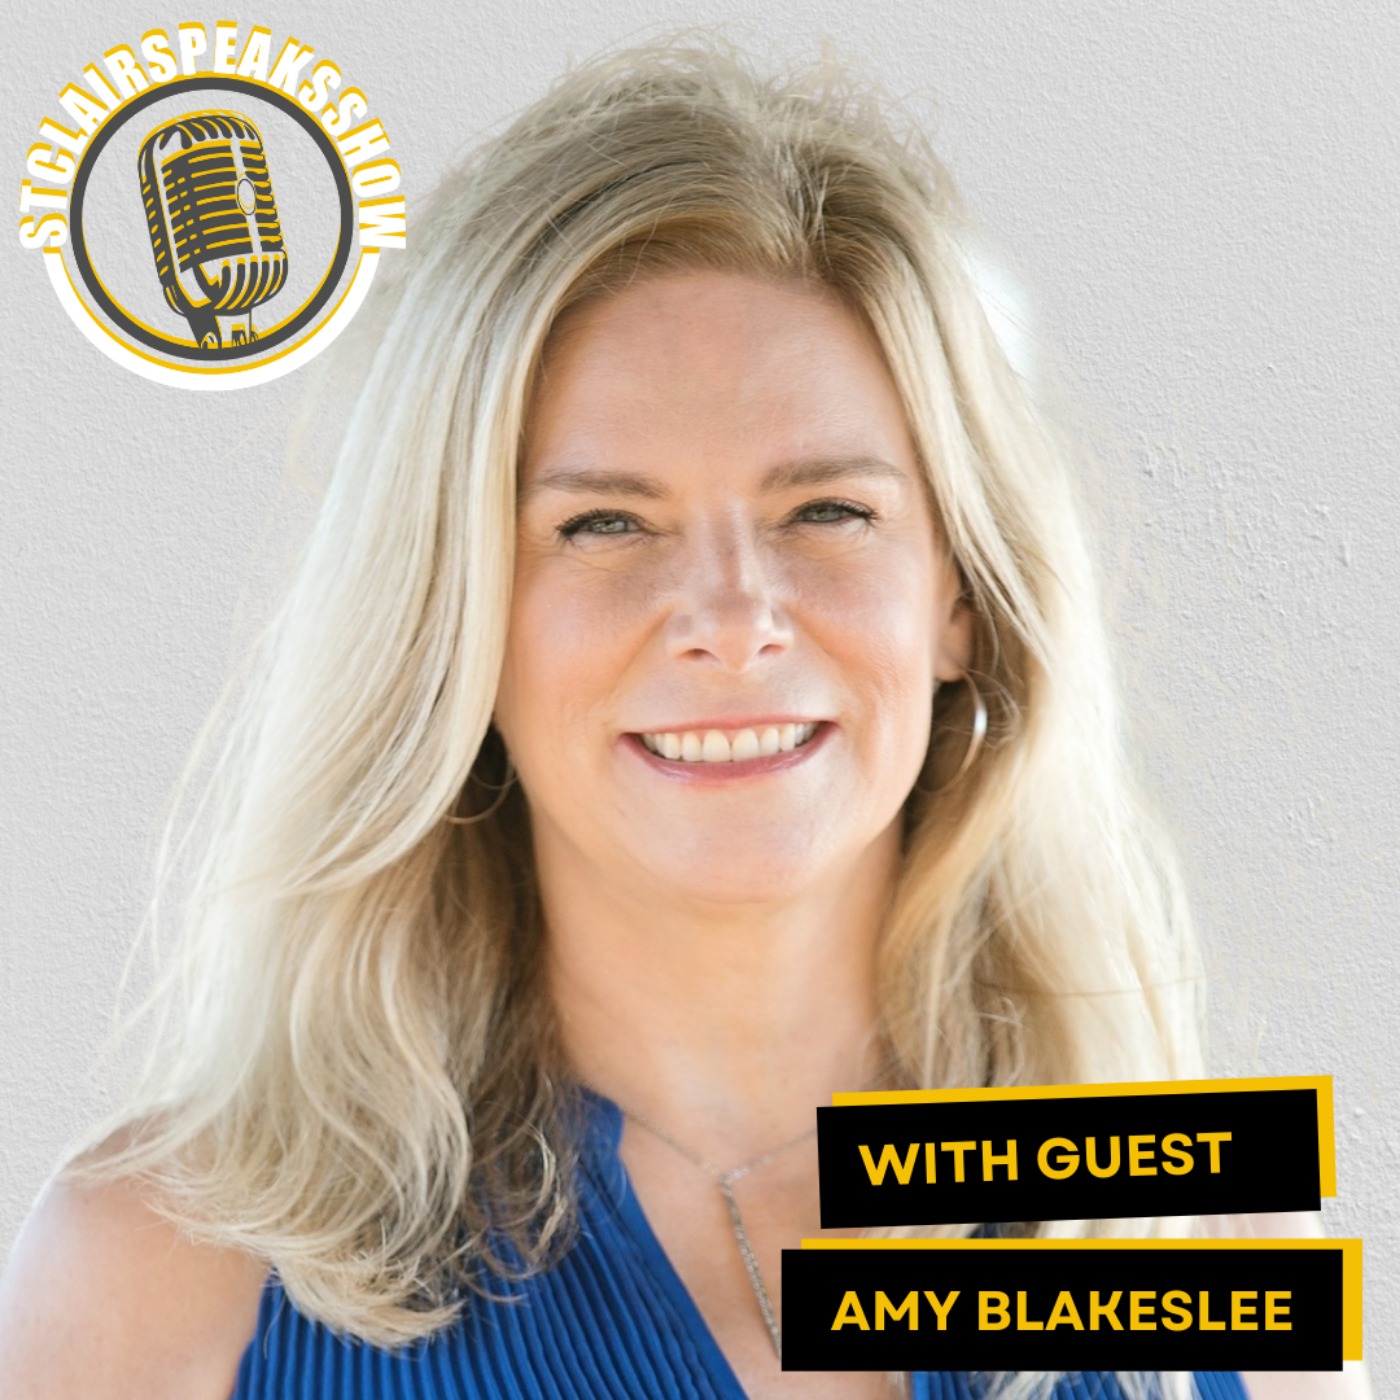 The StclairSpeaksShow Podcast with Amy Blakeslee - Awakening Through Anxiety And Overcoming Limiting Beliefs.